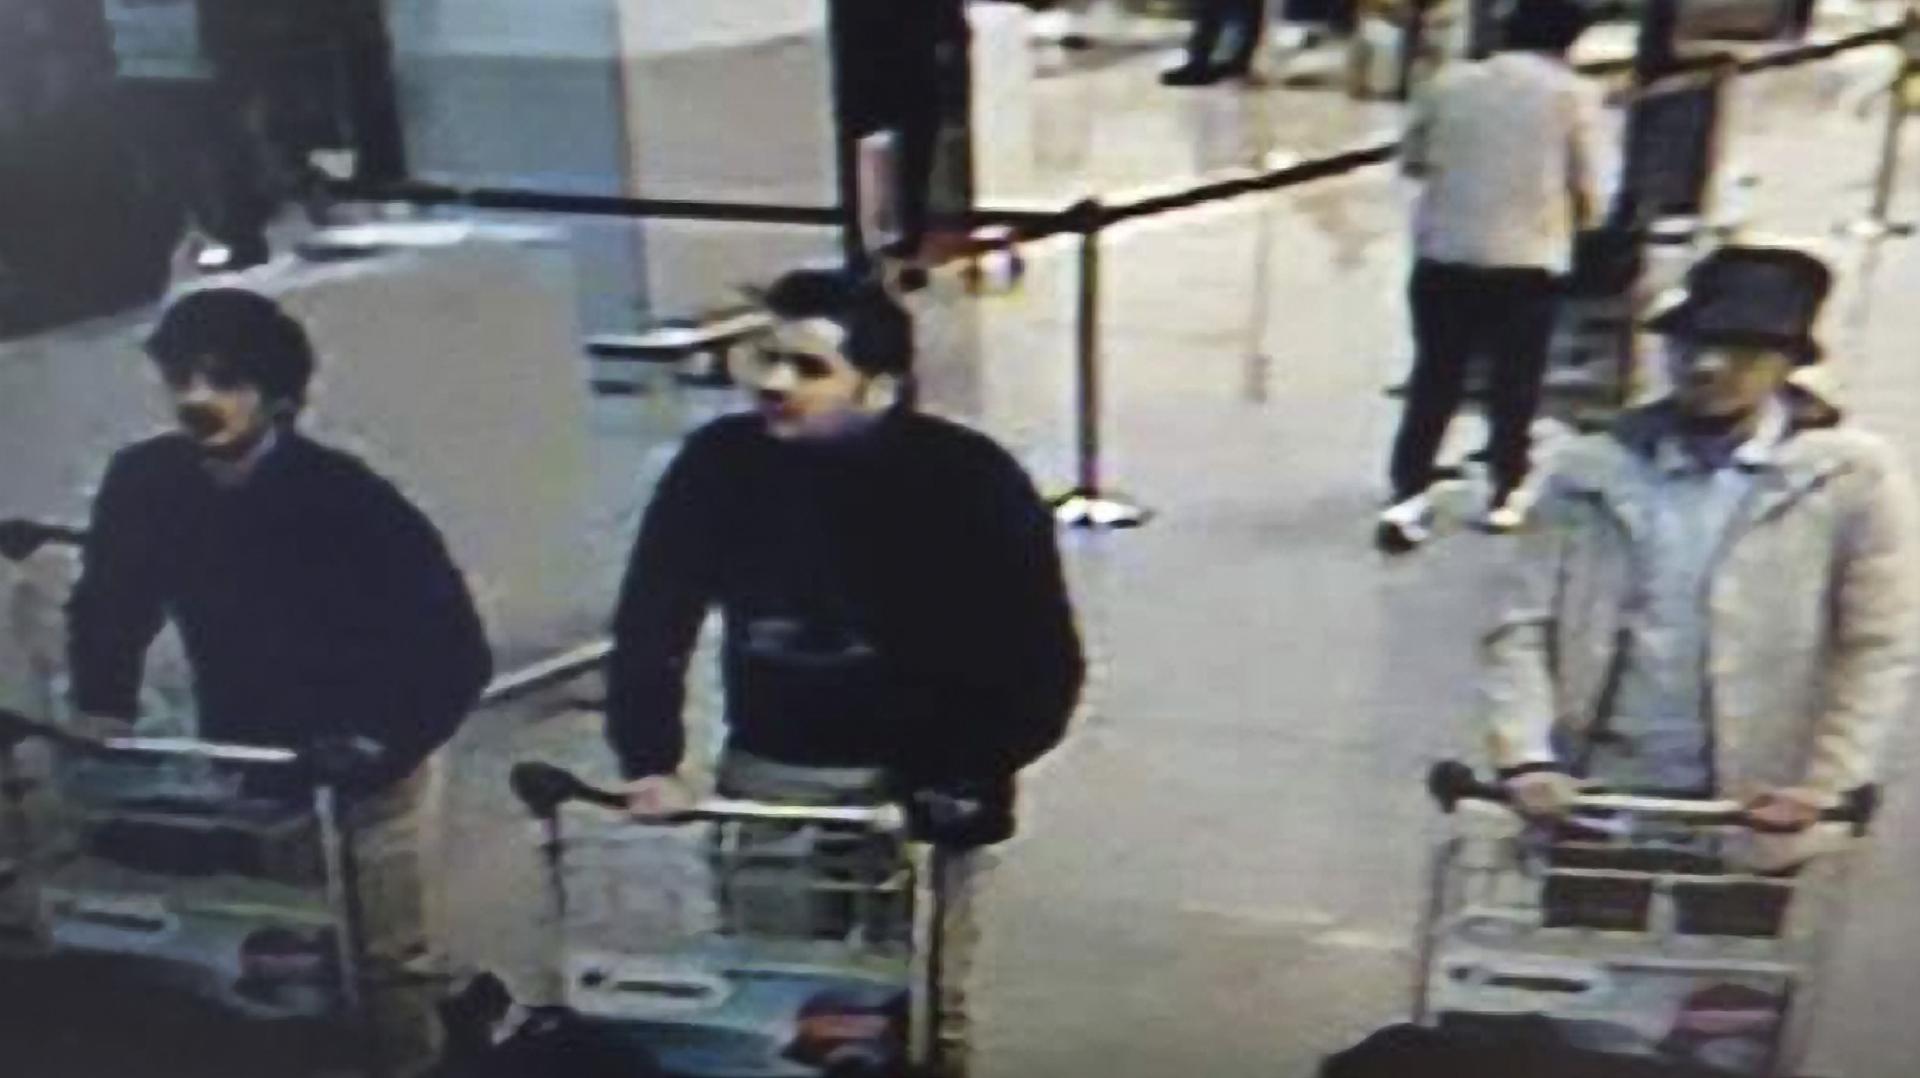 suspects in the Brussels airport attack